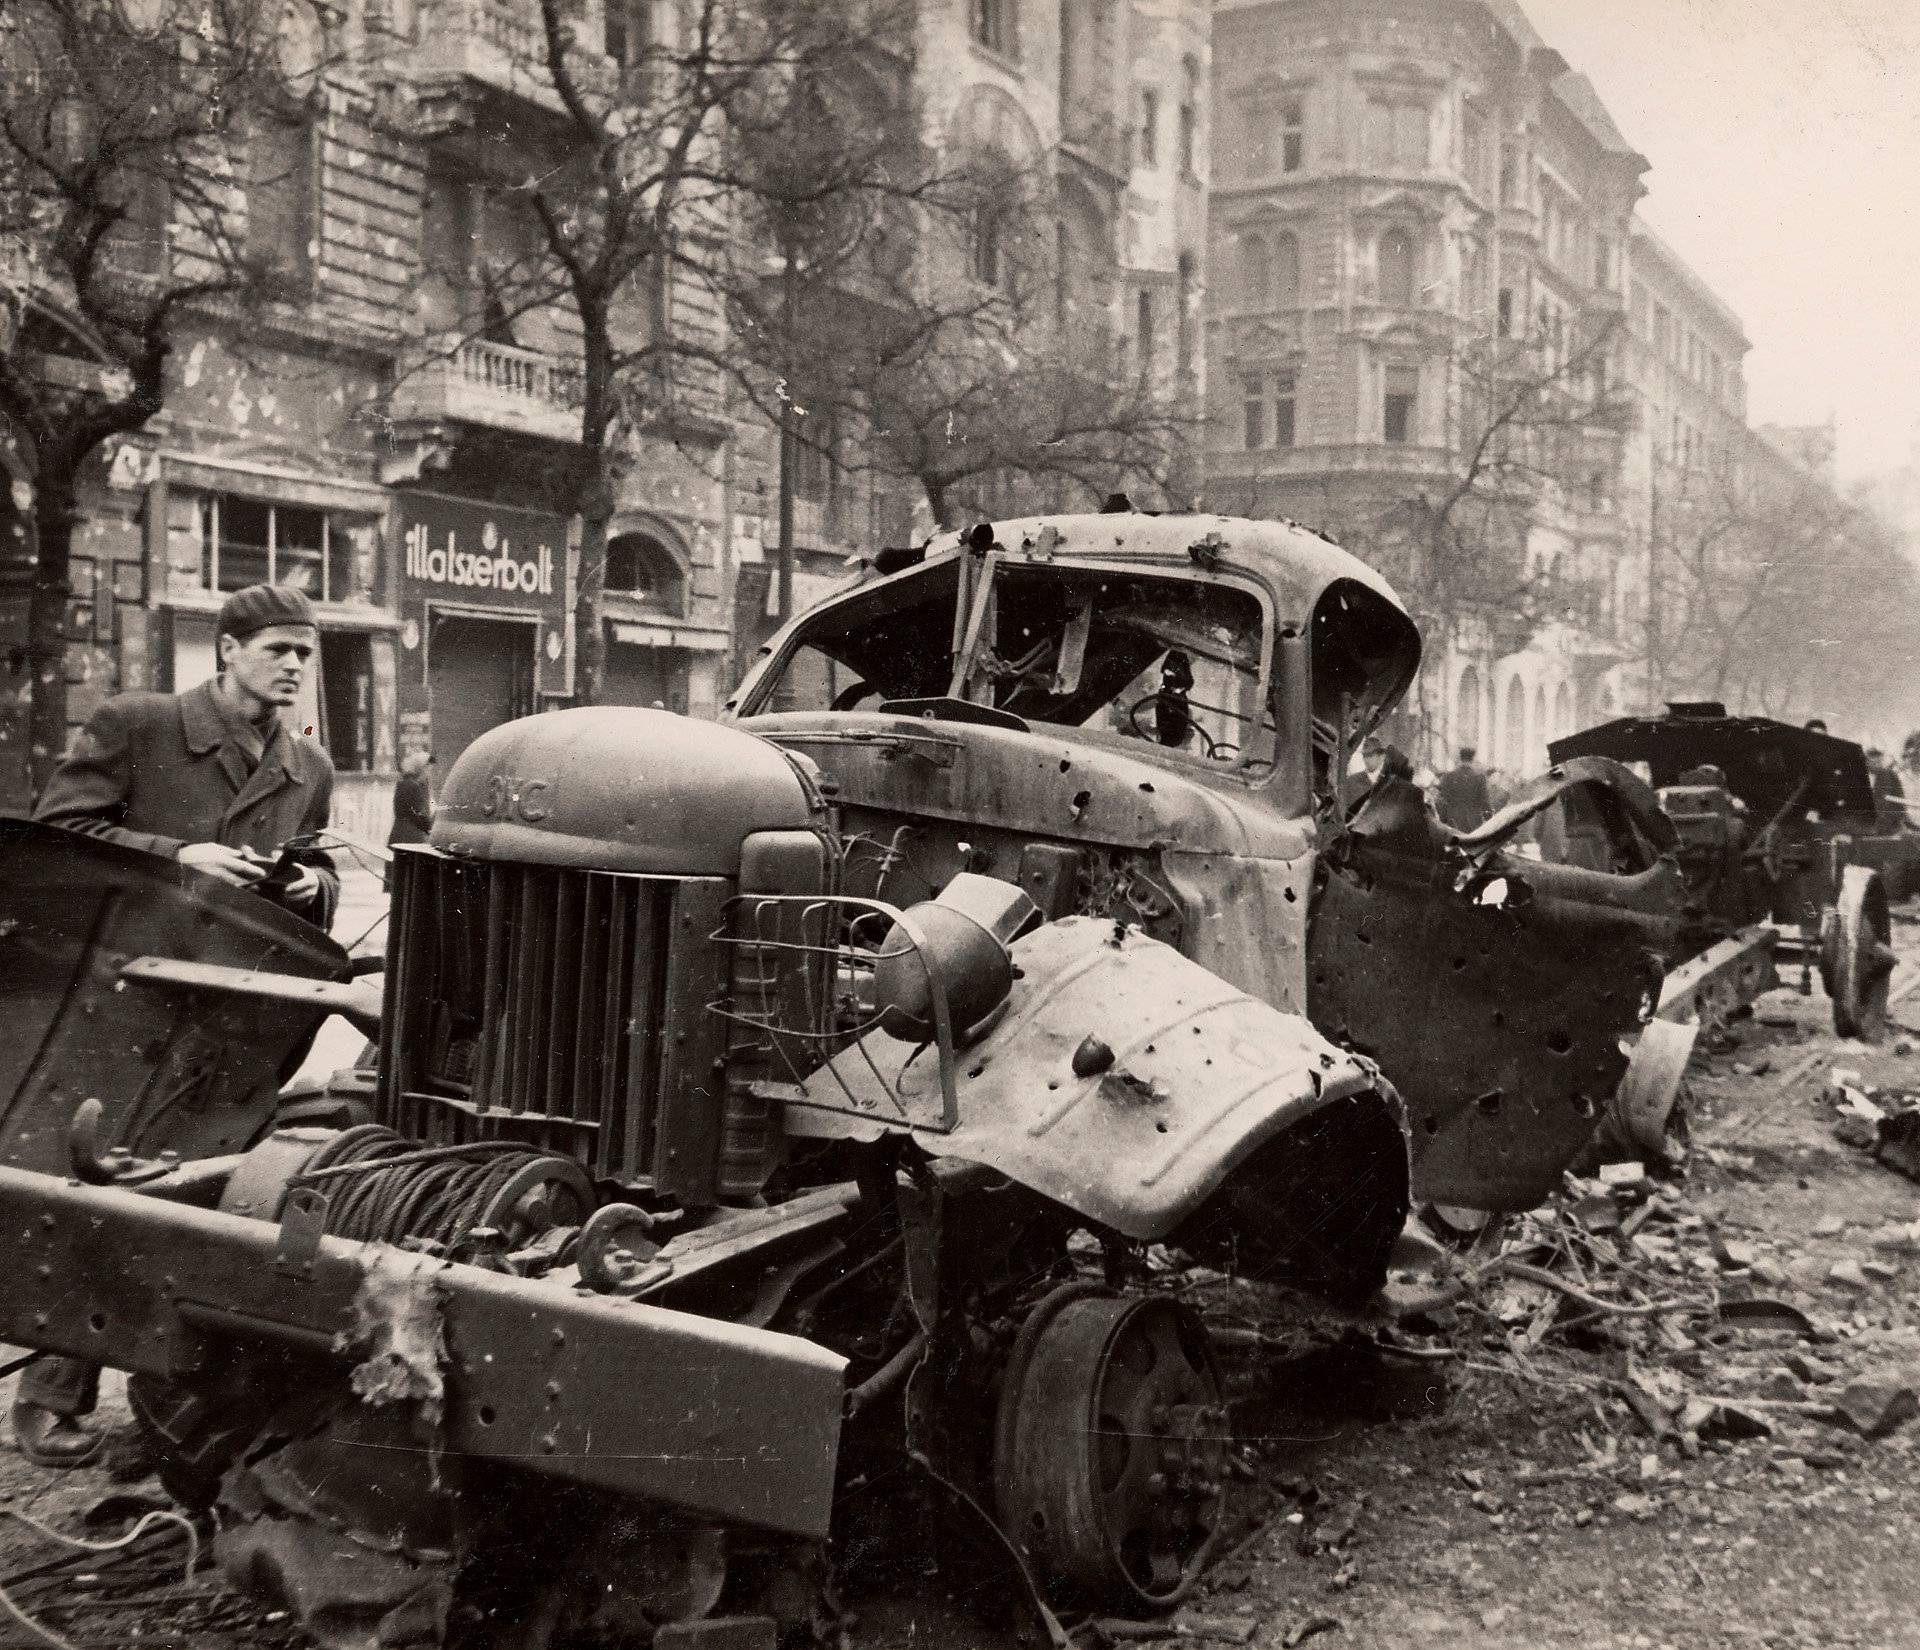 A general view shows the wreckage of armed trucks on the streets of Budapest at the time of the uprising against the Soviet-supported Hungarian communist regime in 1956